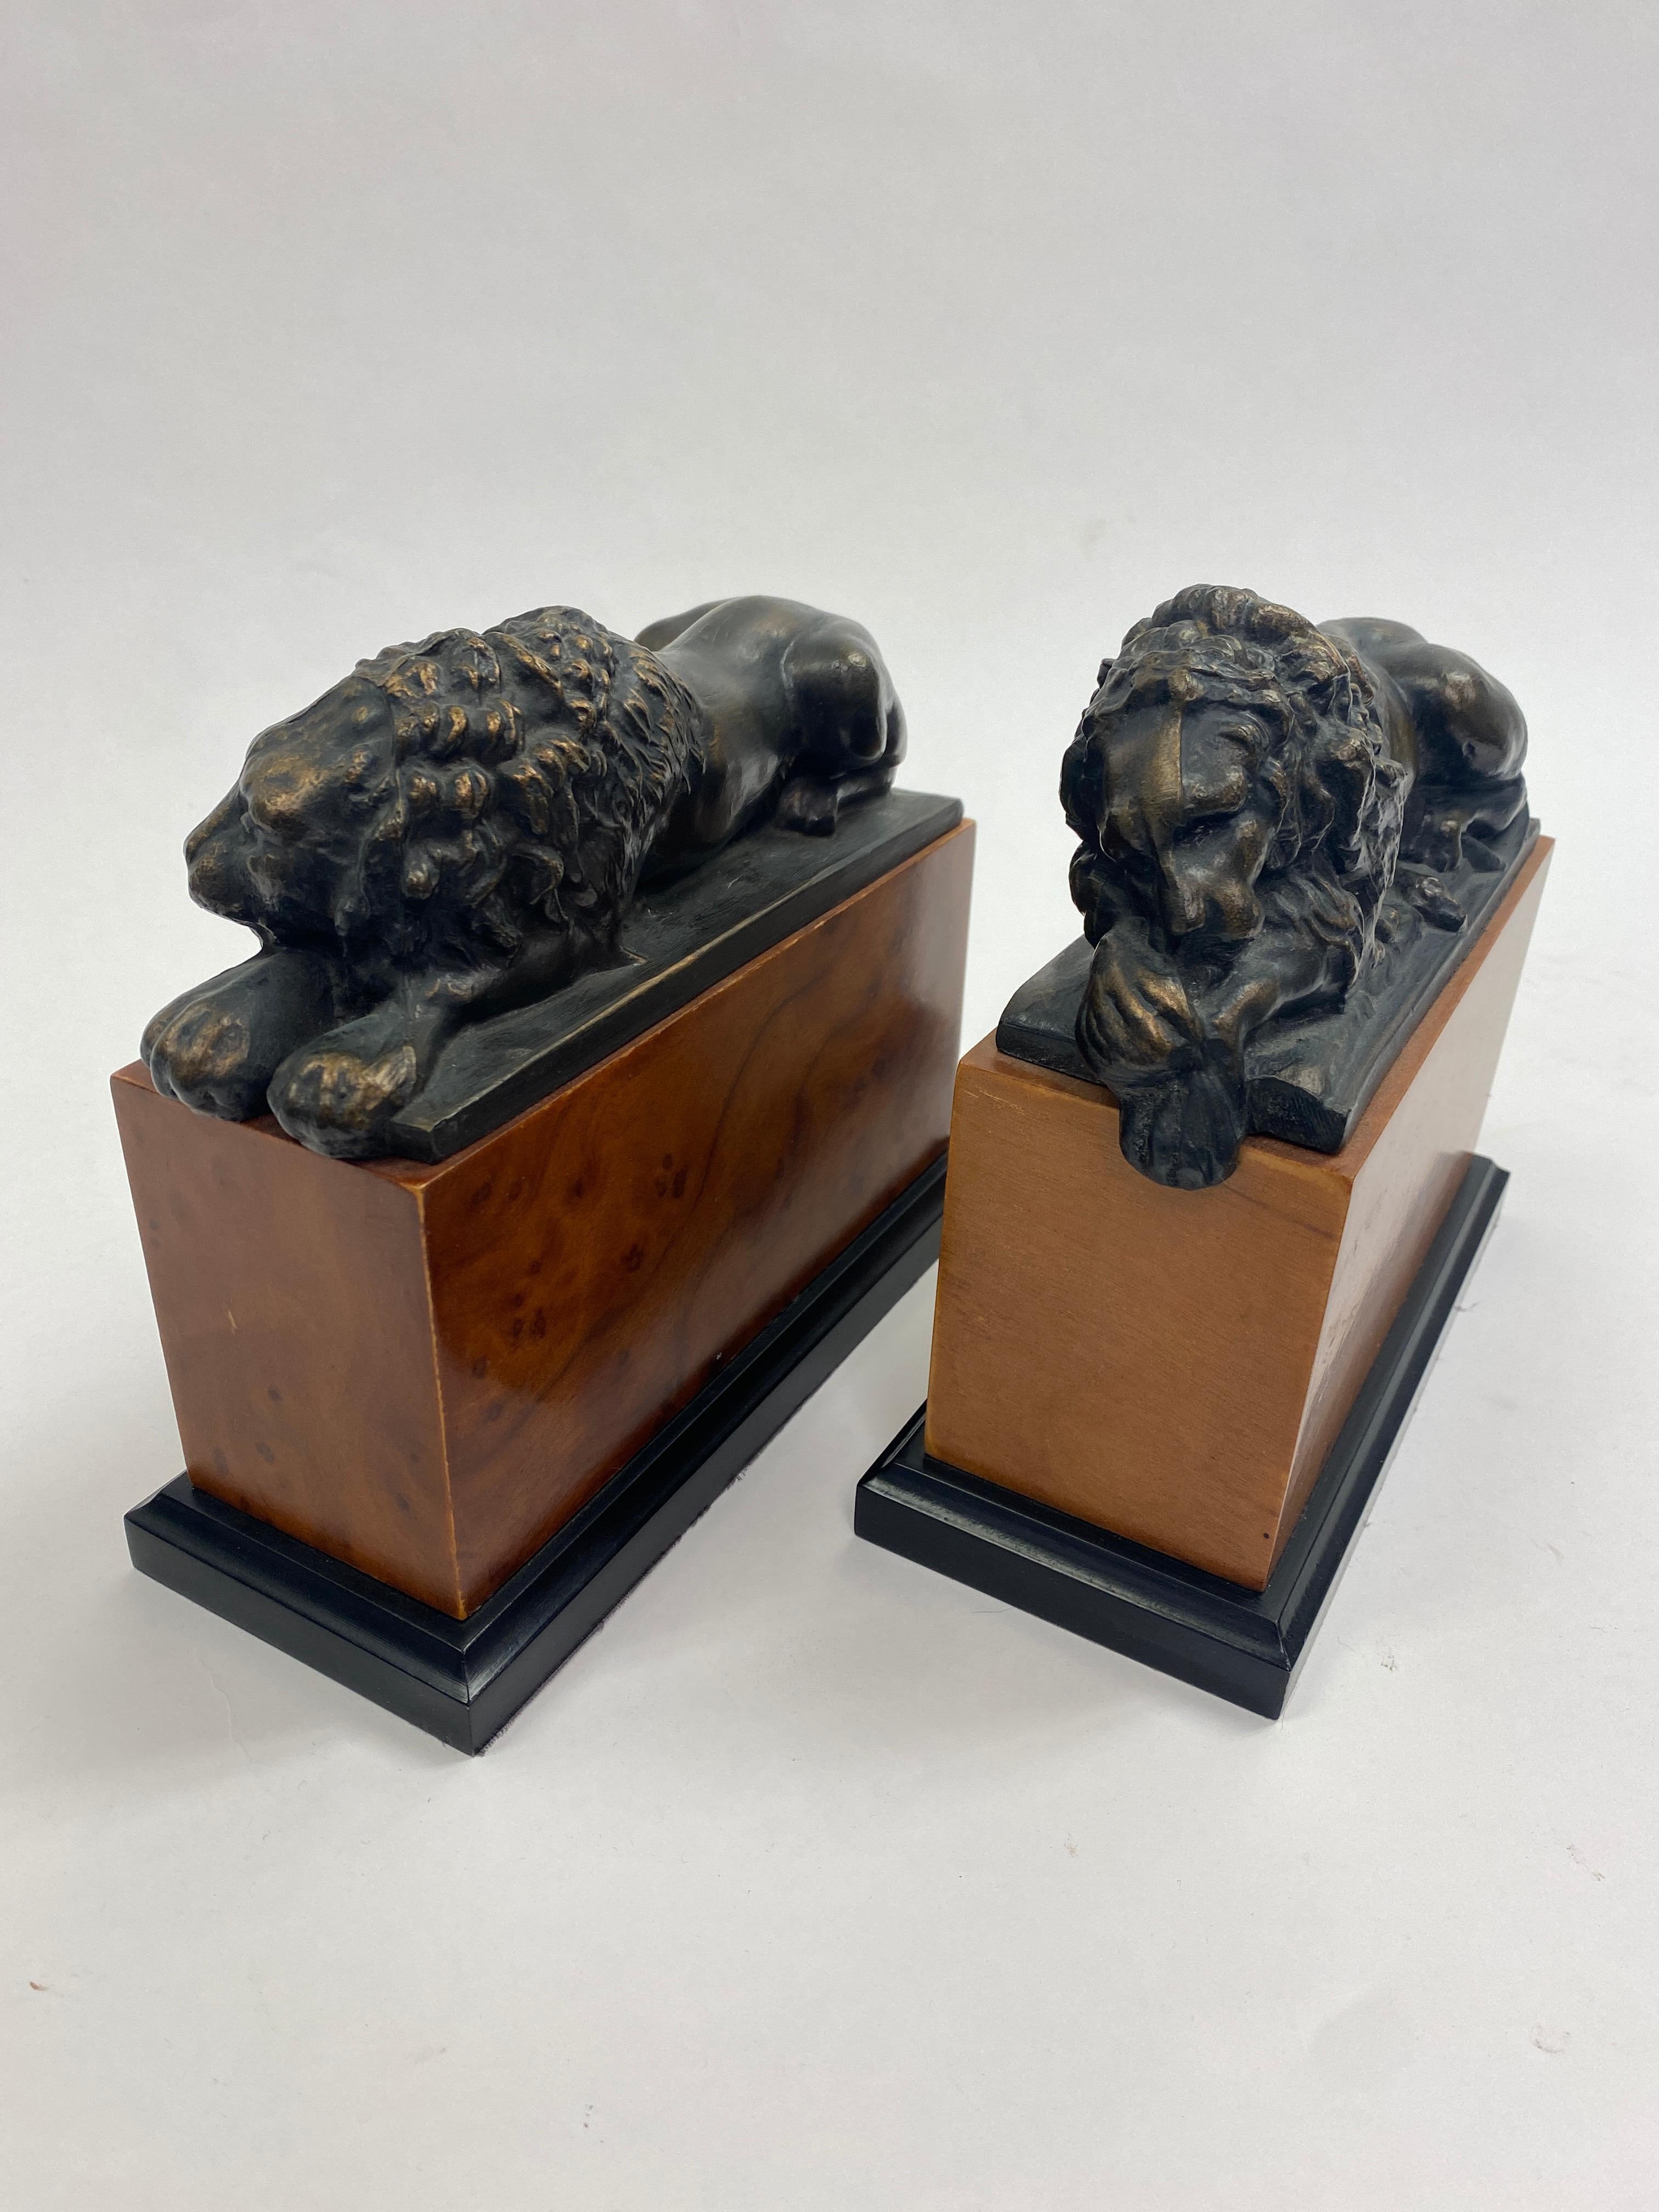 American Hollywood Regency Bronze Lion Bookends